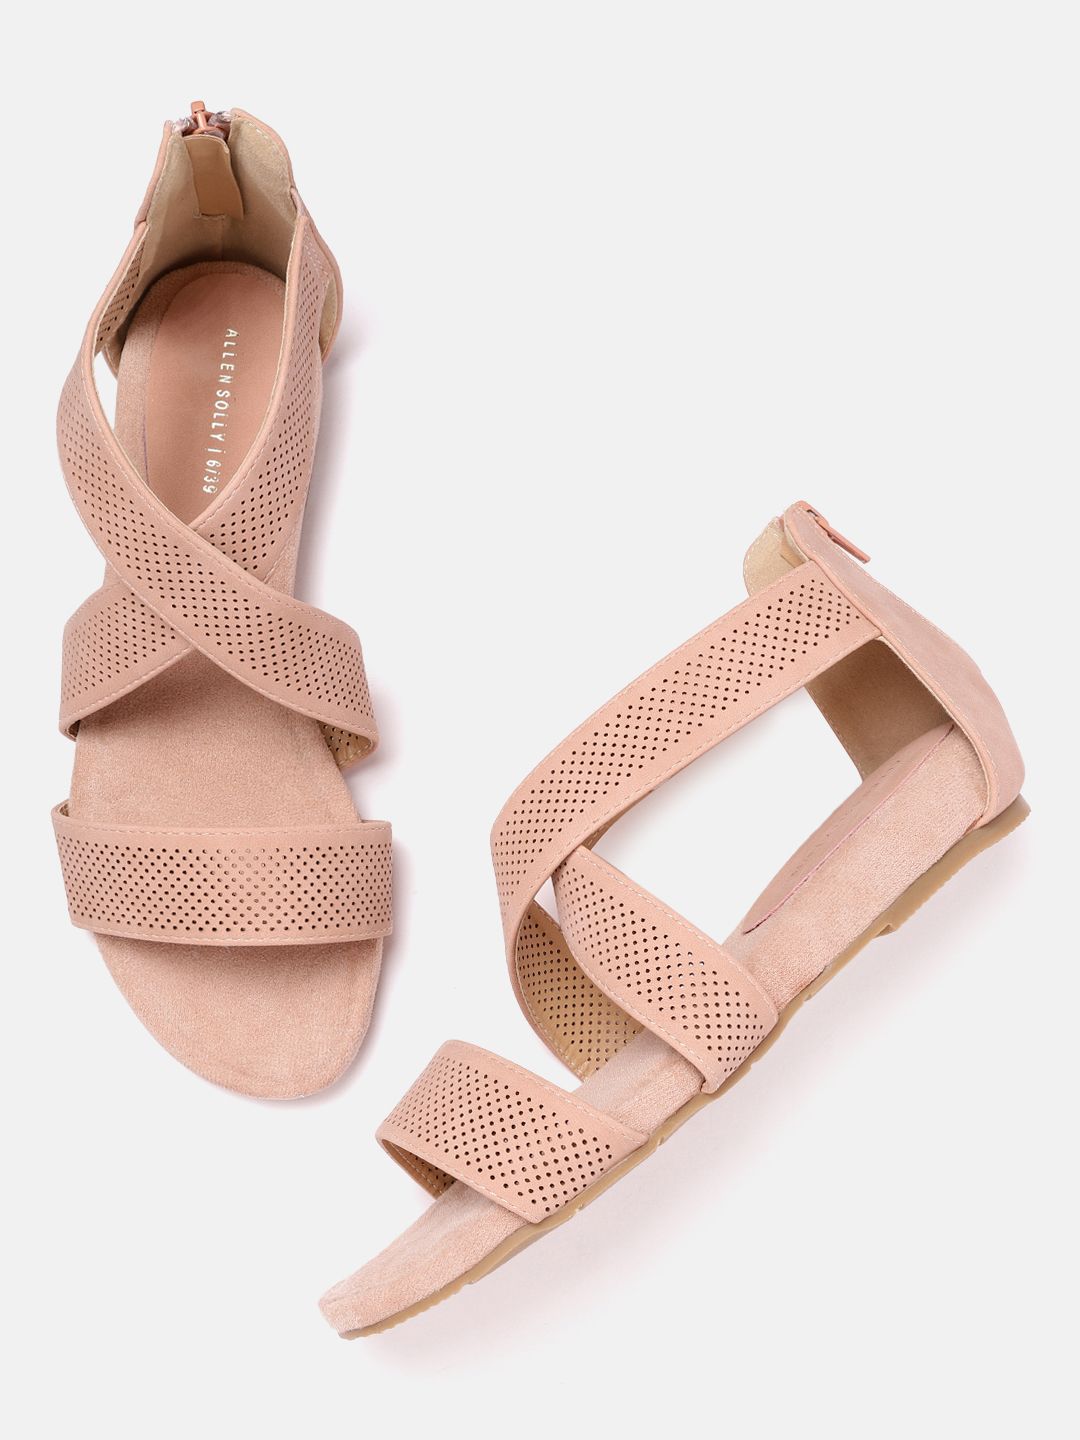 Allen Solly Women Peach-Coloured Perforated Mid-Top Open Toe Flats Price in India